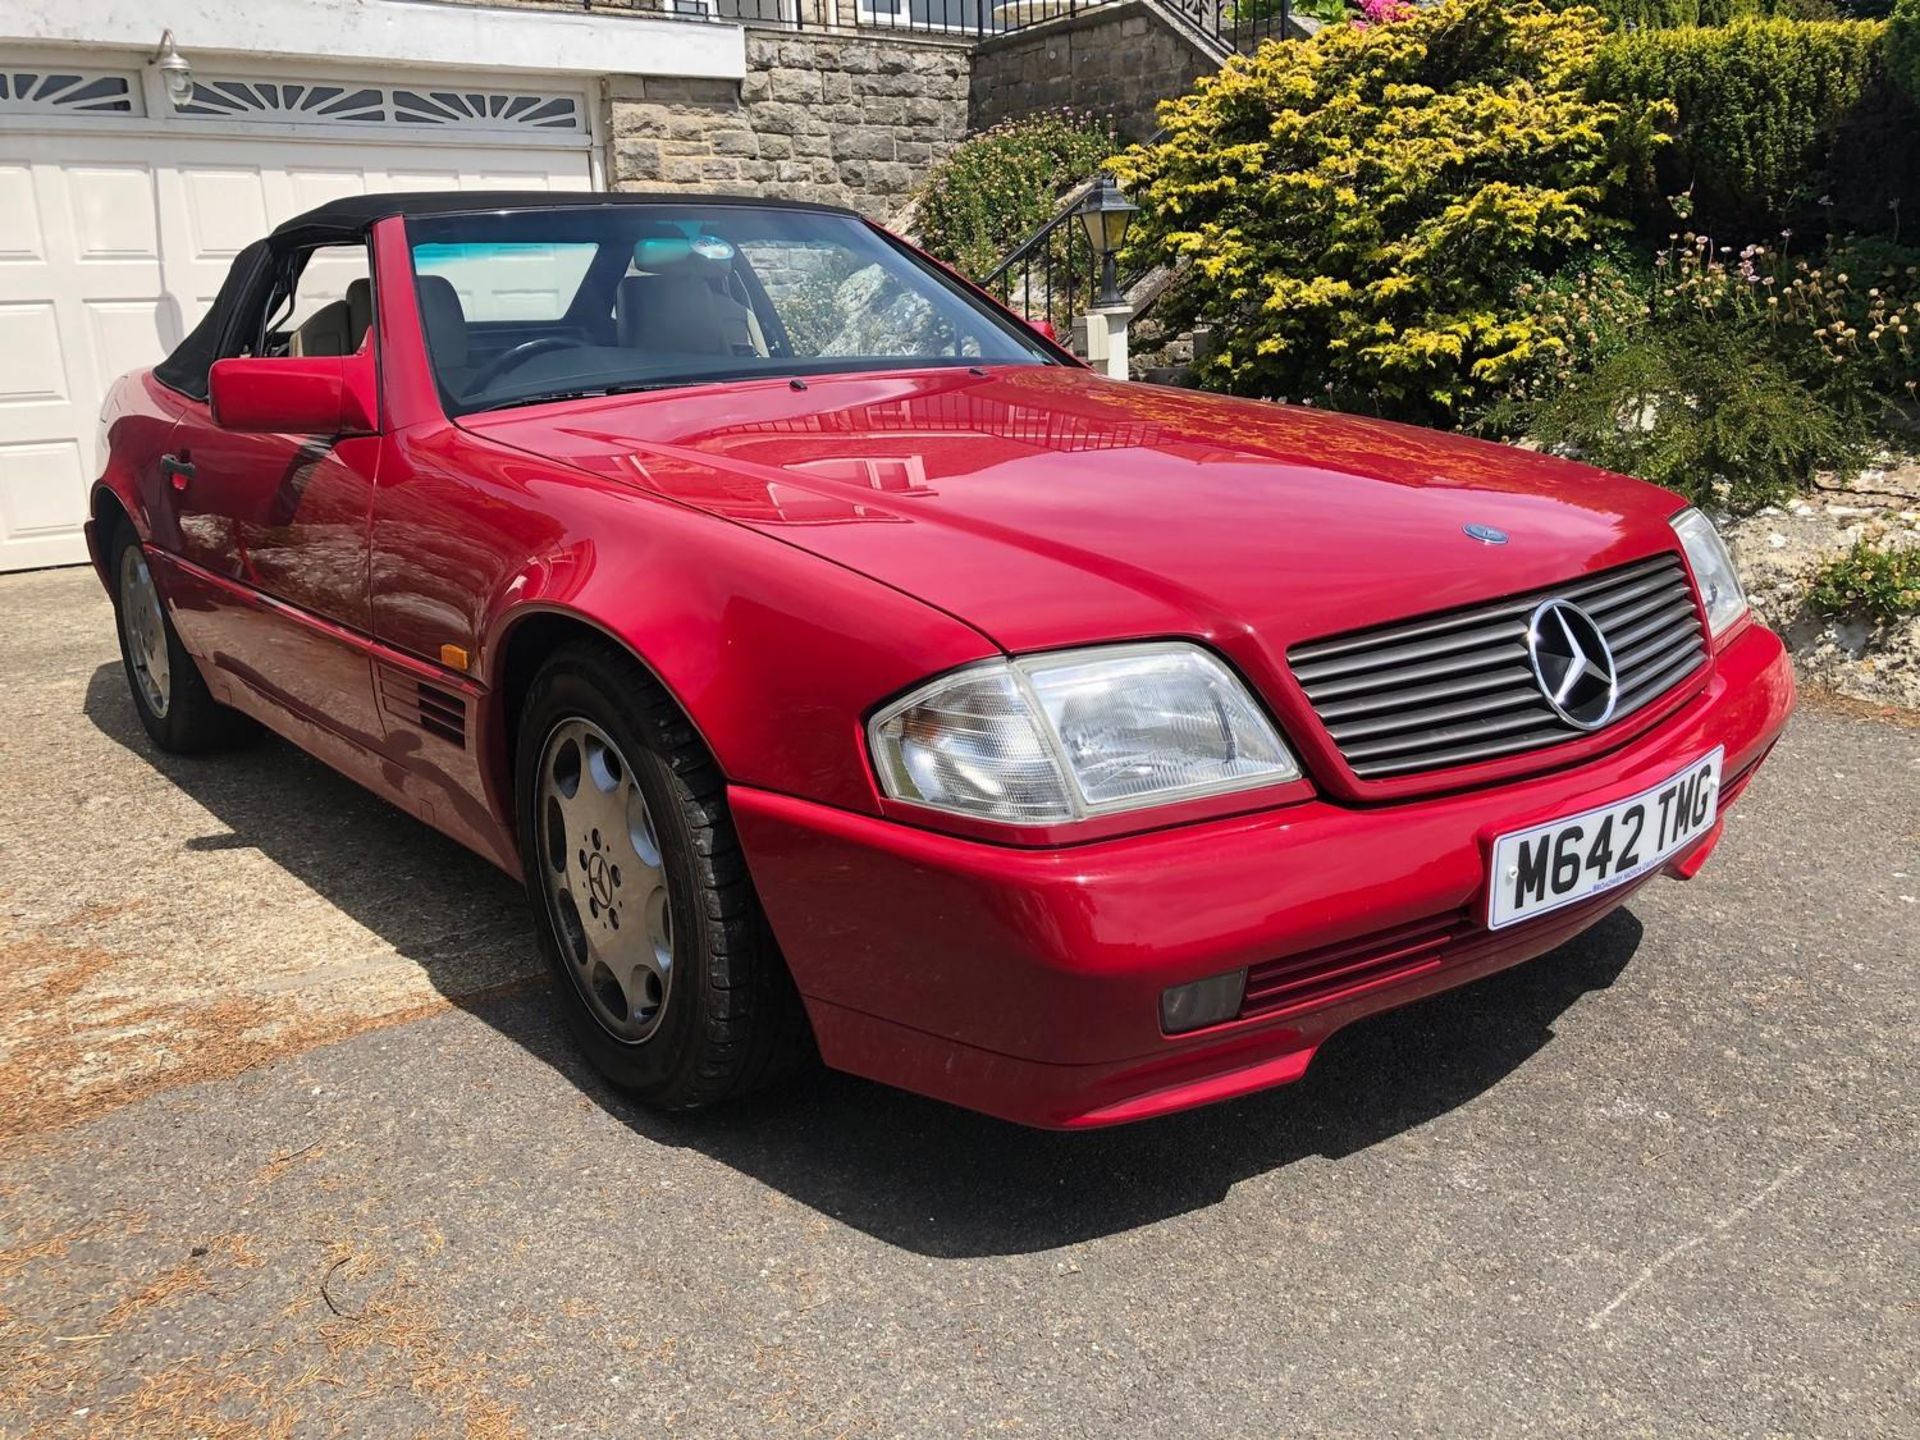 A 1995 Mercedes-Benz 280SL Registration number M642 TMG V5C MOT expires February 2021 Red with a - Image 35 of 107